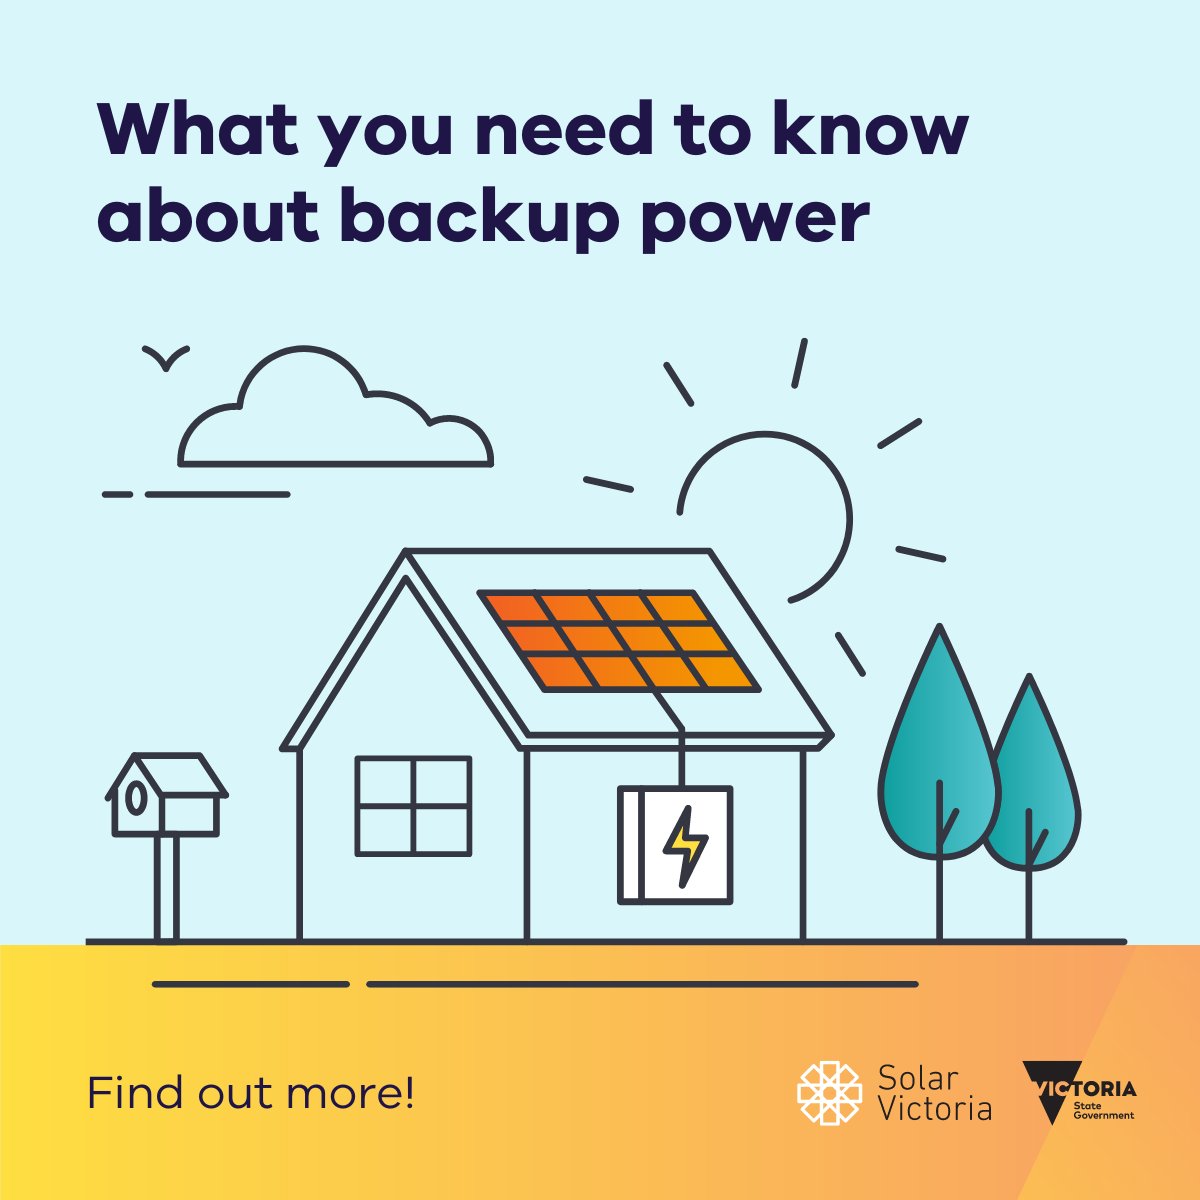 🔋 #Solar battery systems with battery backup are becoming more common and could be useful if you live in an area prone to experiencing extreme weather conditions. 👉 Learn more about which #battery systems can provide back-up power in emergencies: solar.vic.gov.au/backup-battery…